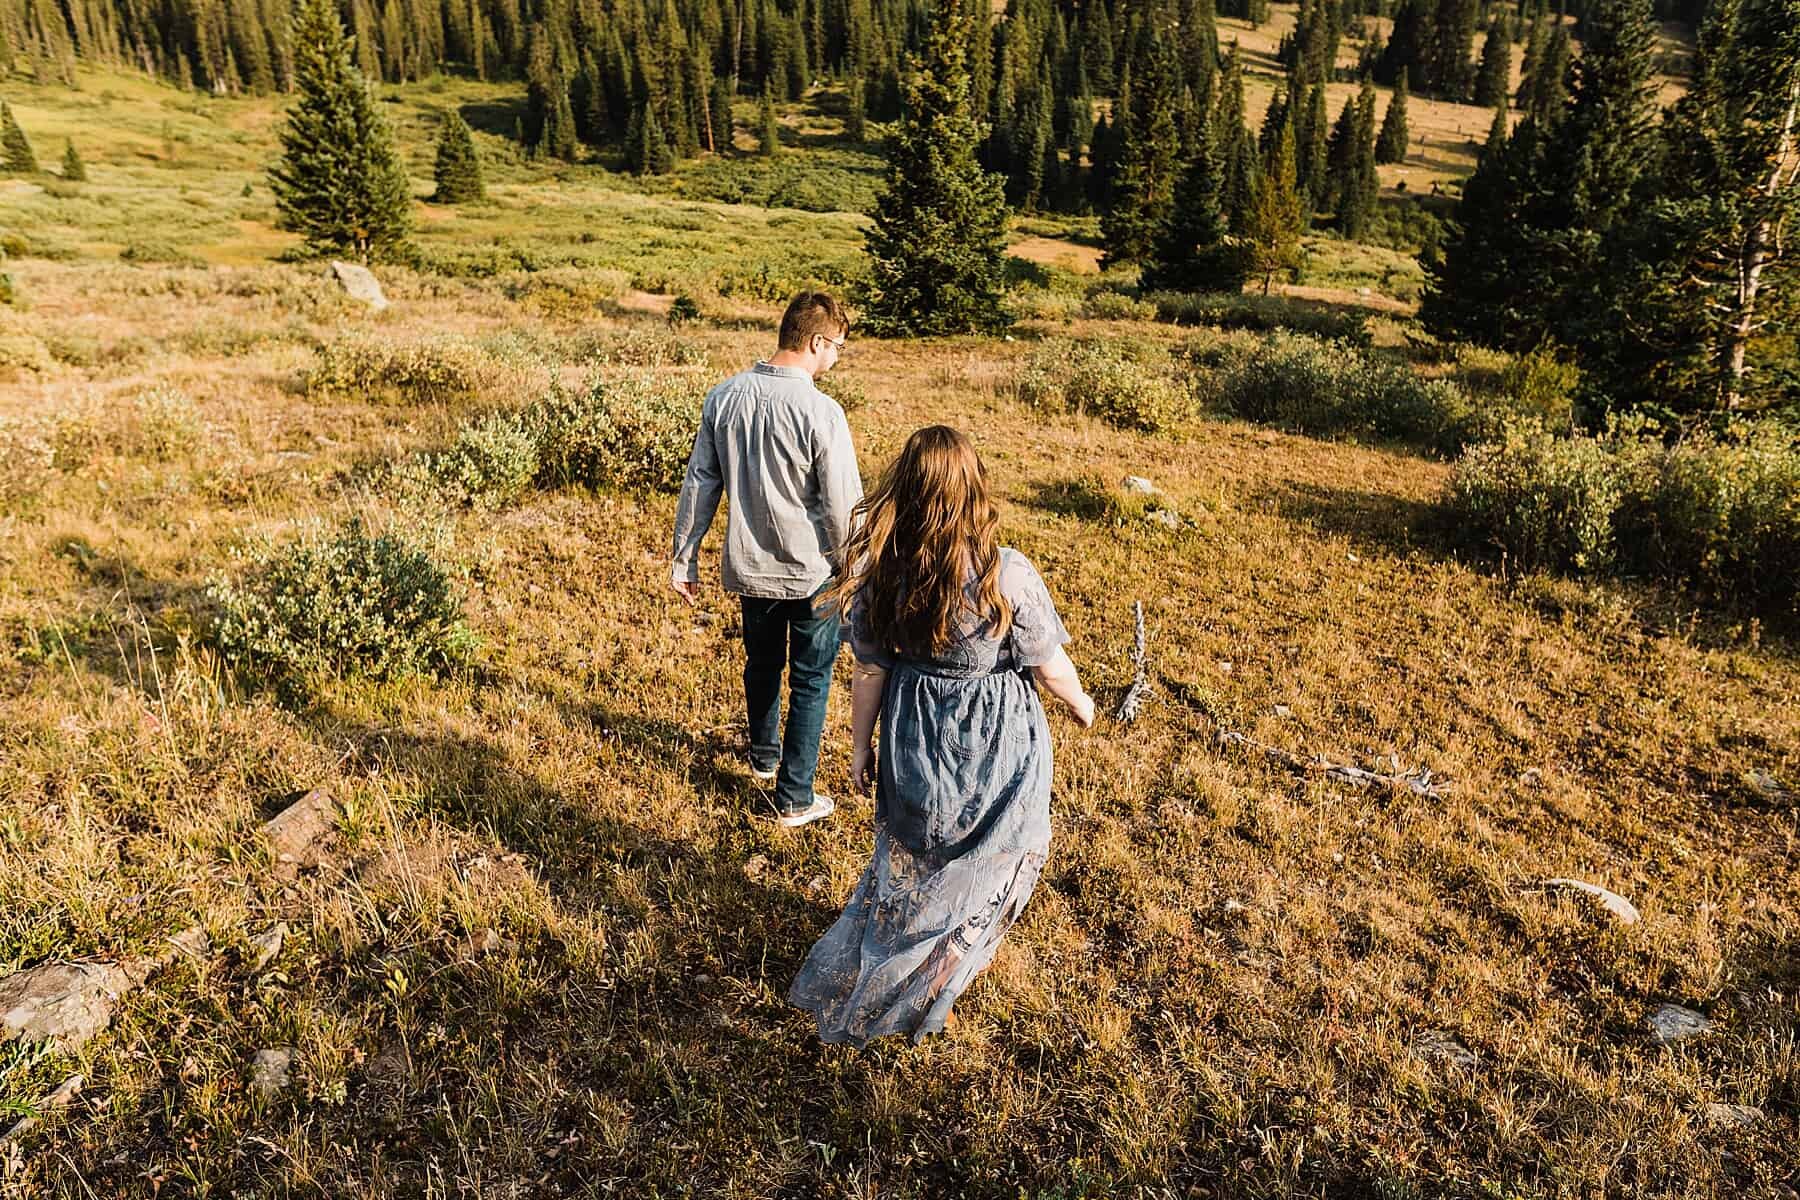 Aspen Adventure Engagement Session | Vow of the Wild